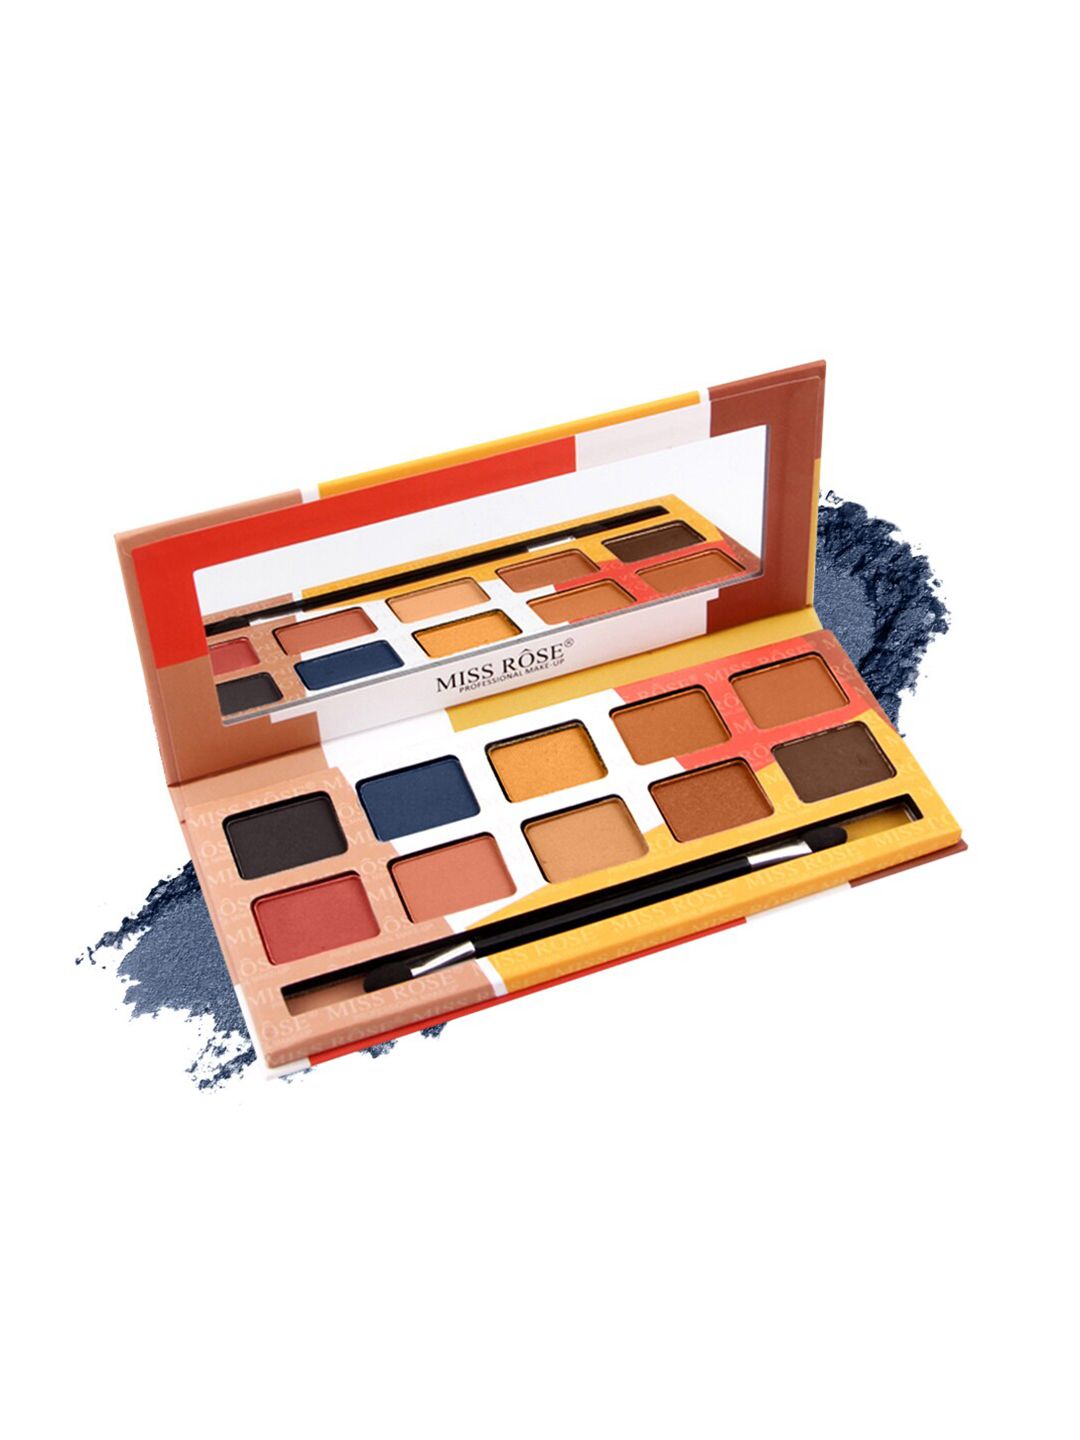 MISS ROSE 12 Color Nude Eyeshadow Palette Price in India